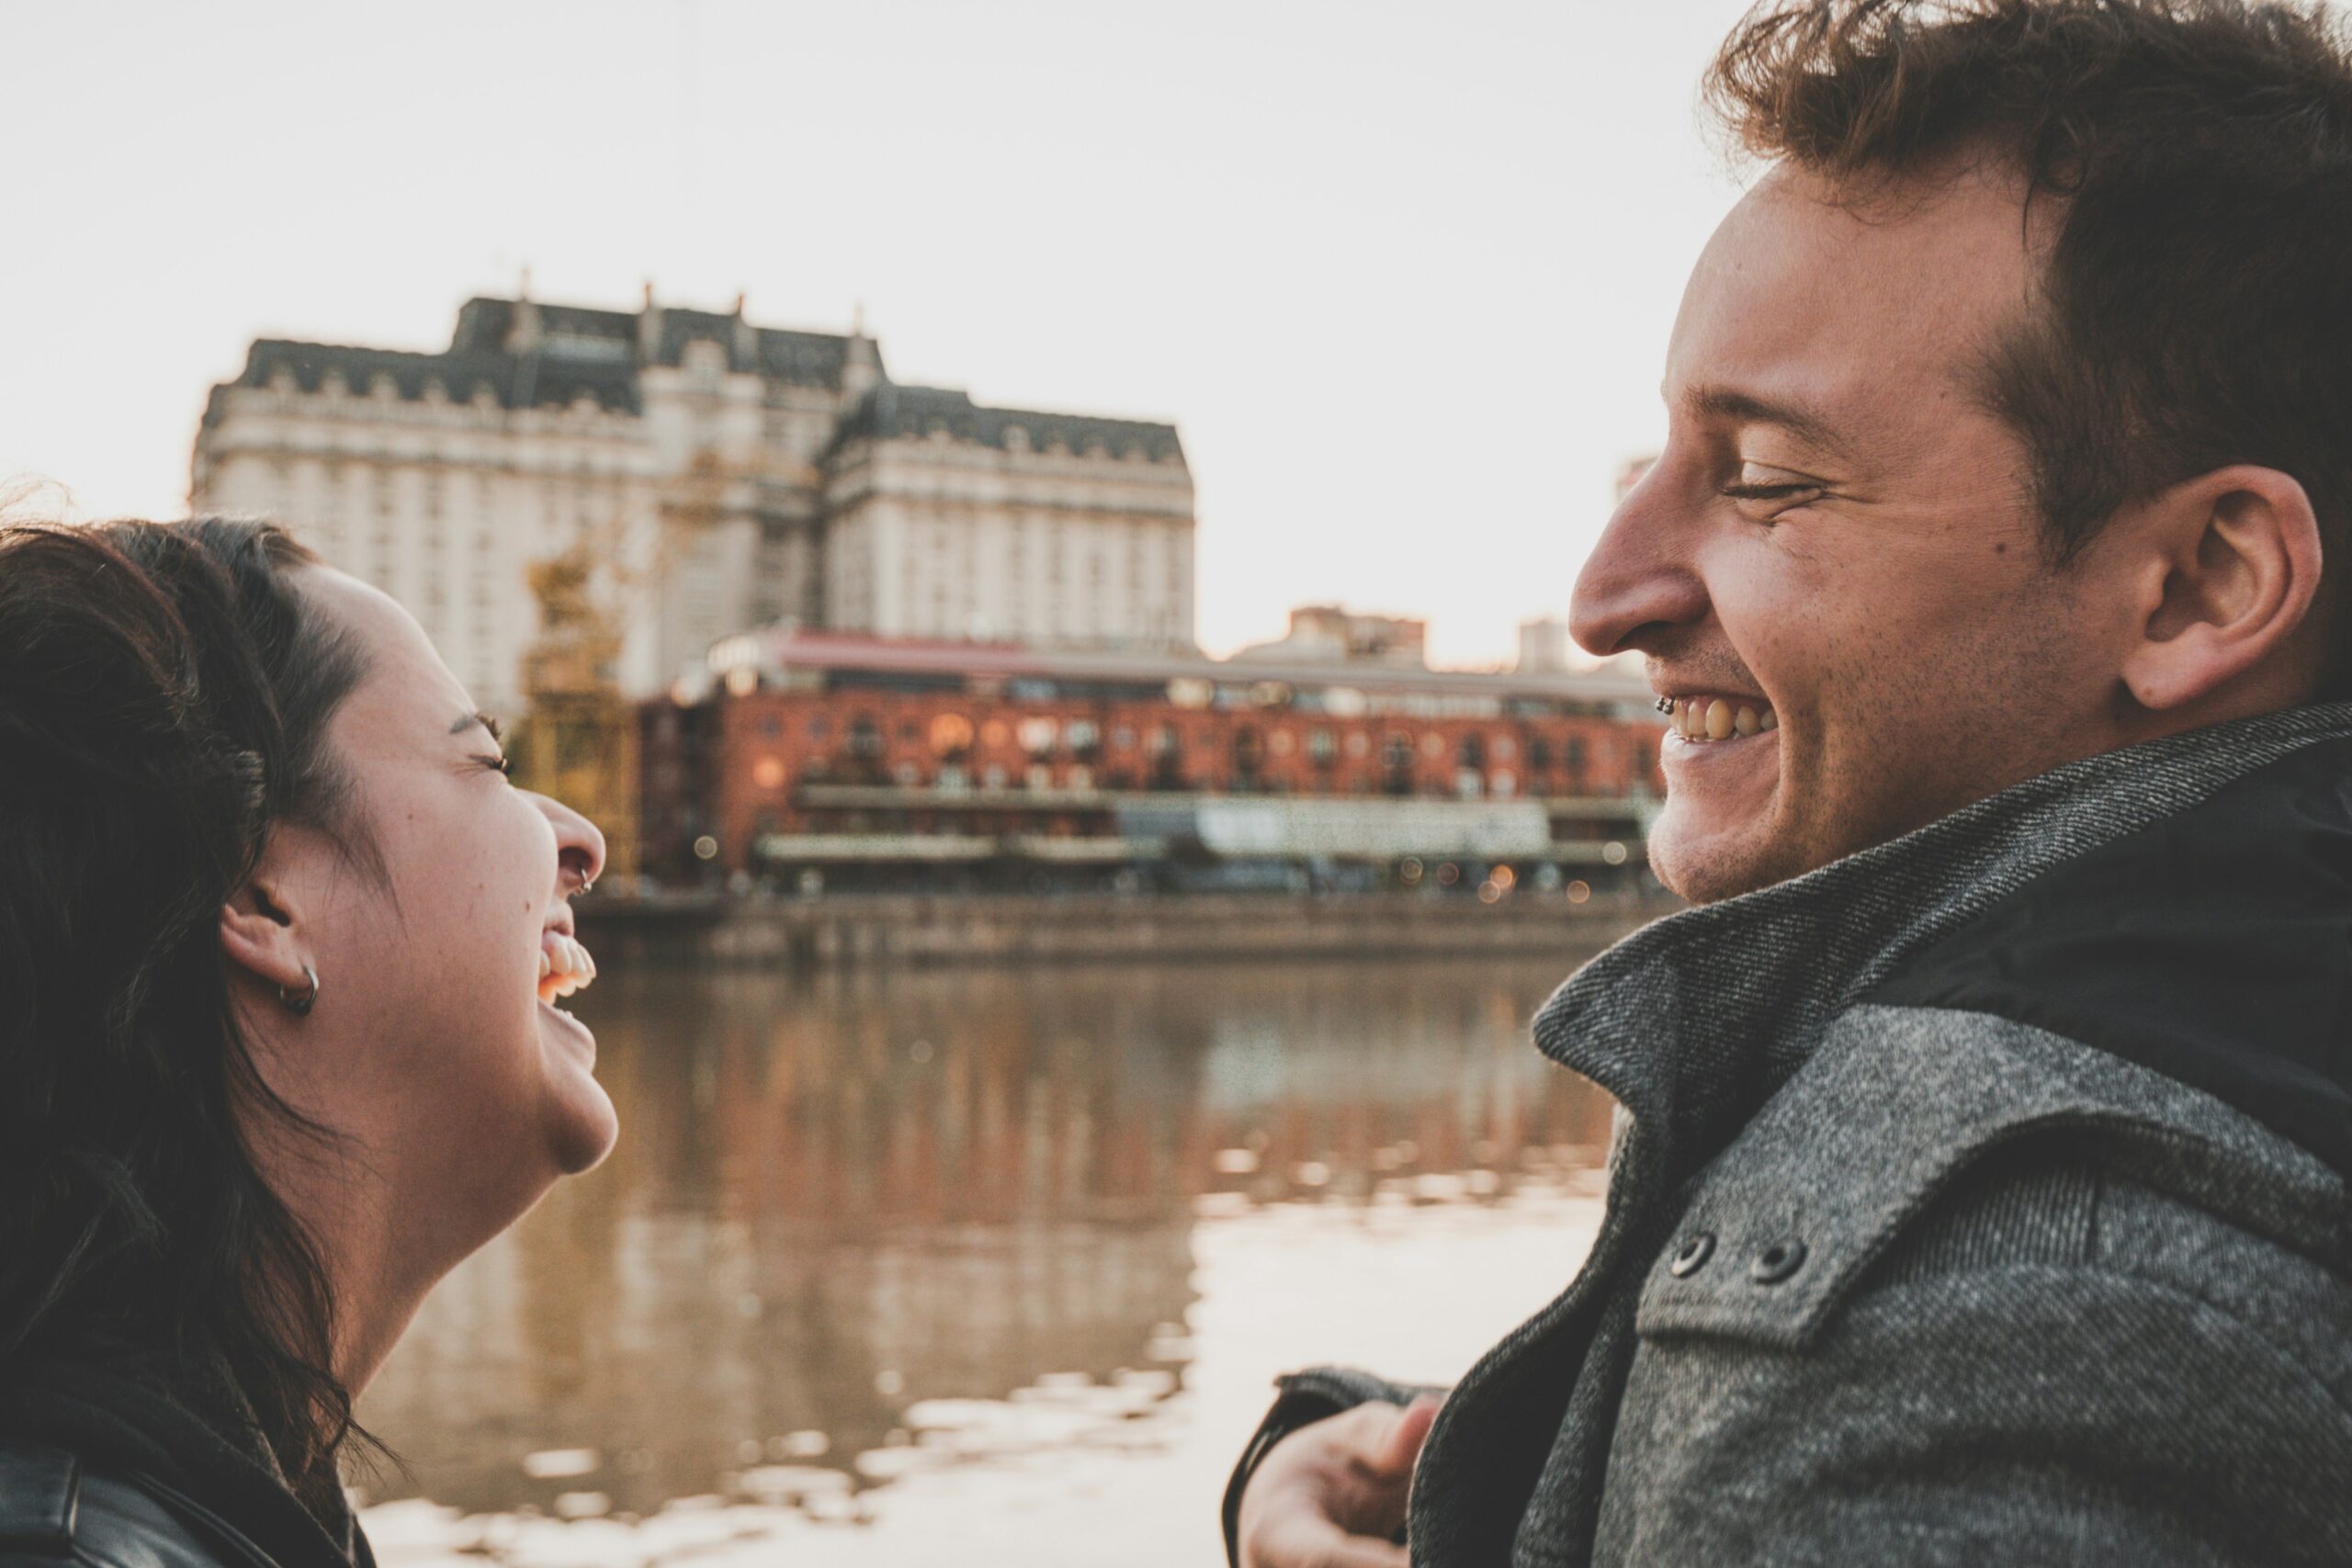 How humor can be an avoidance tactic in your relationship.